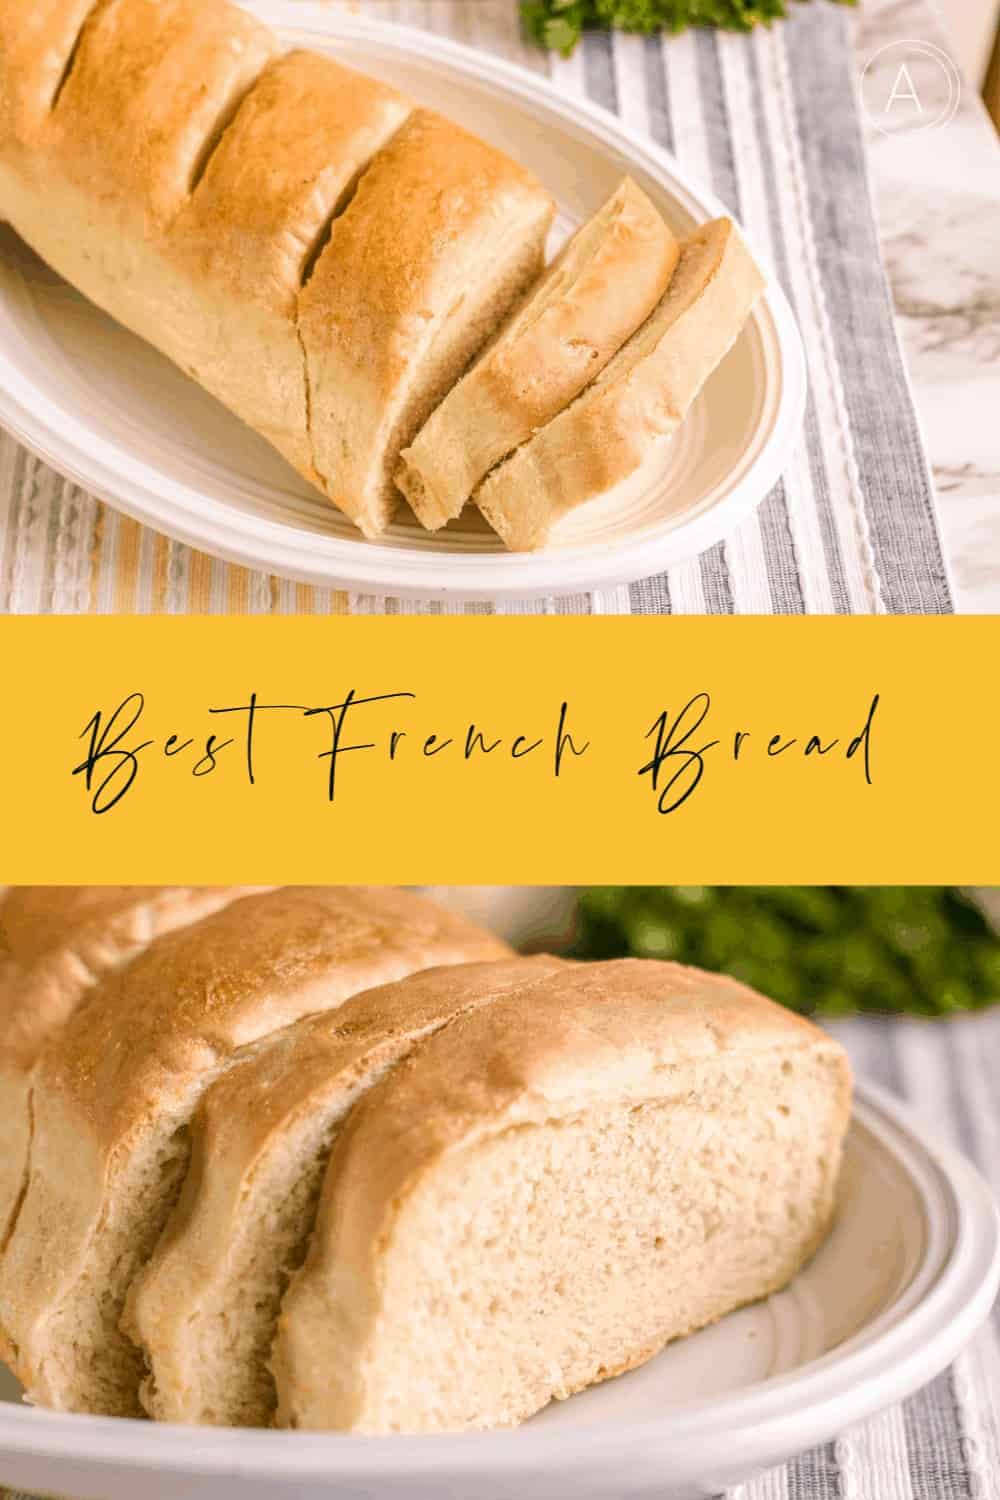 Stand Mixer French Bread is easy to make and so delicious. #bread dough #bread recipe #french bread #standmixerfrenchbread #mooreorlesscooking via @Mooreorlesscook